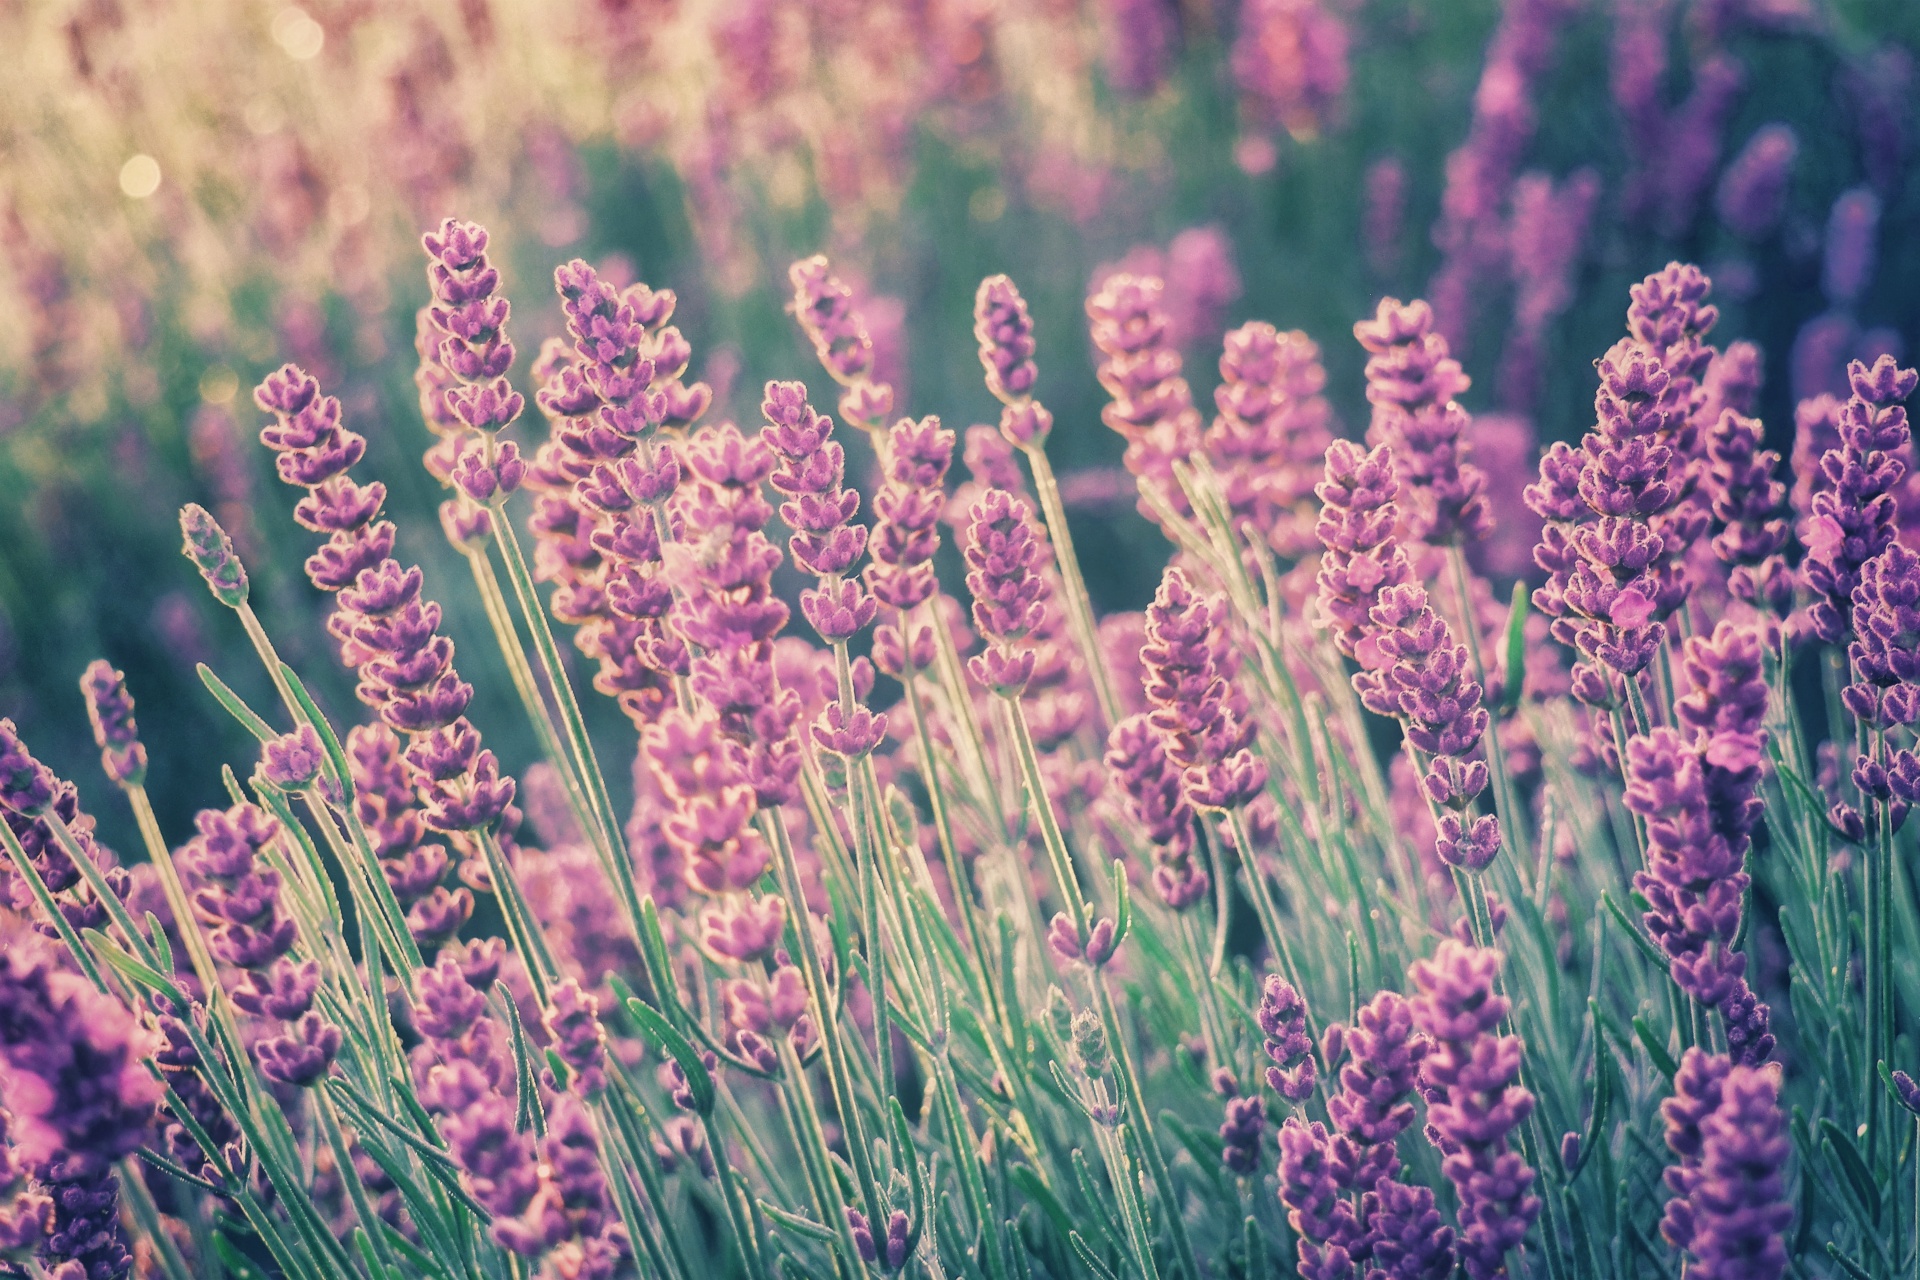 Lavender flowers blossoms wildflowers wild meadow flower meadow photo photography closeup